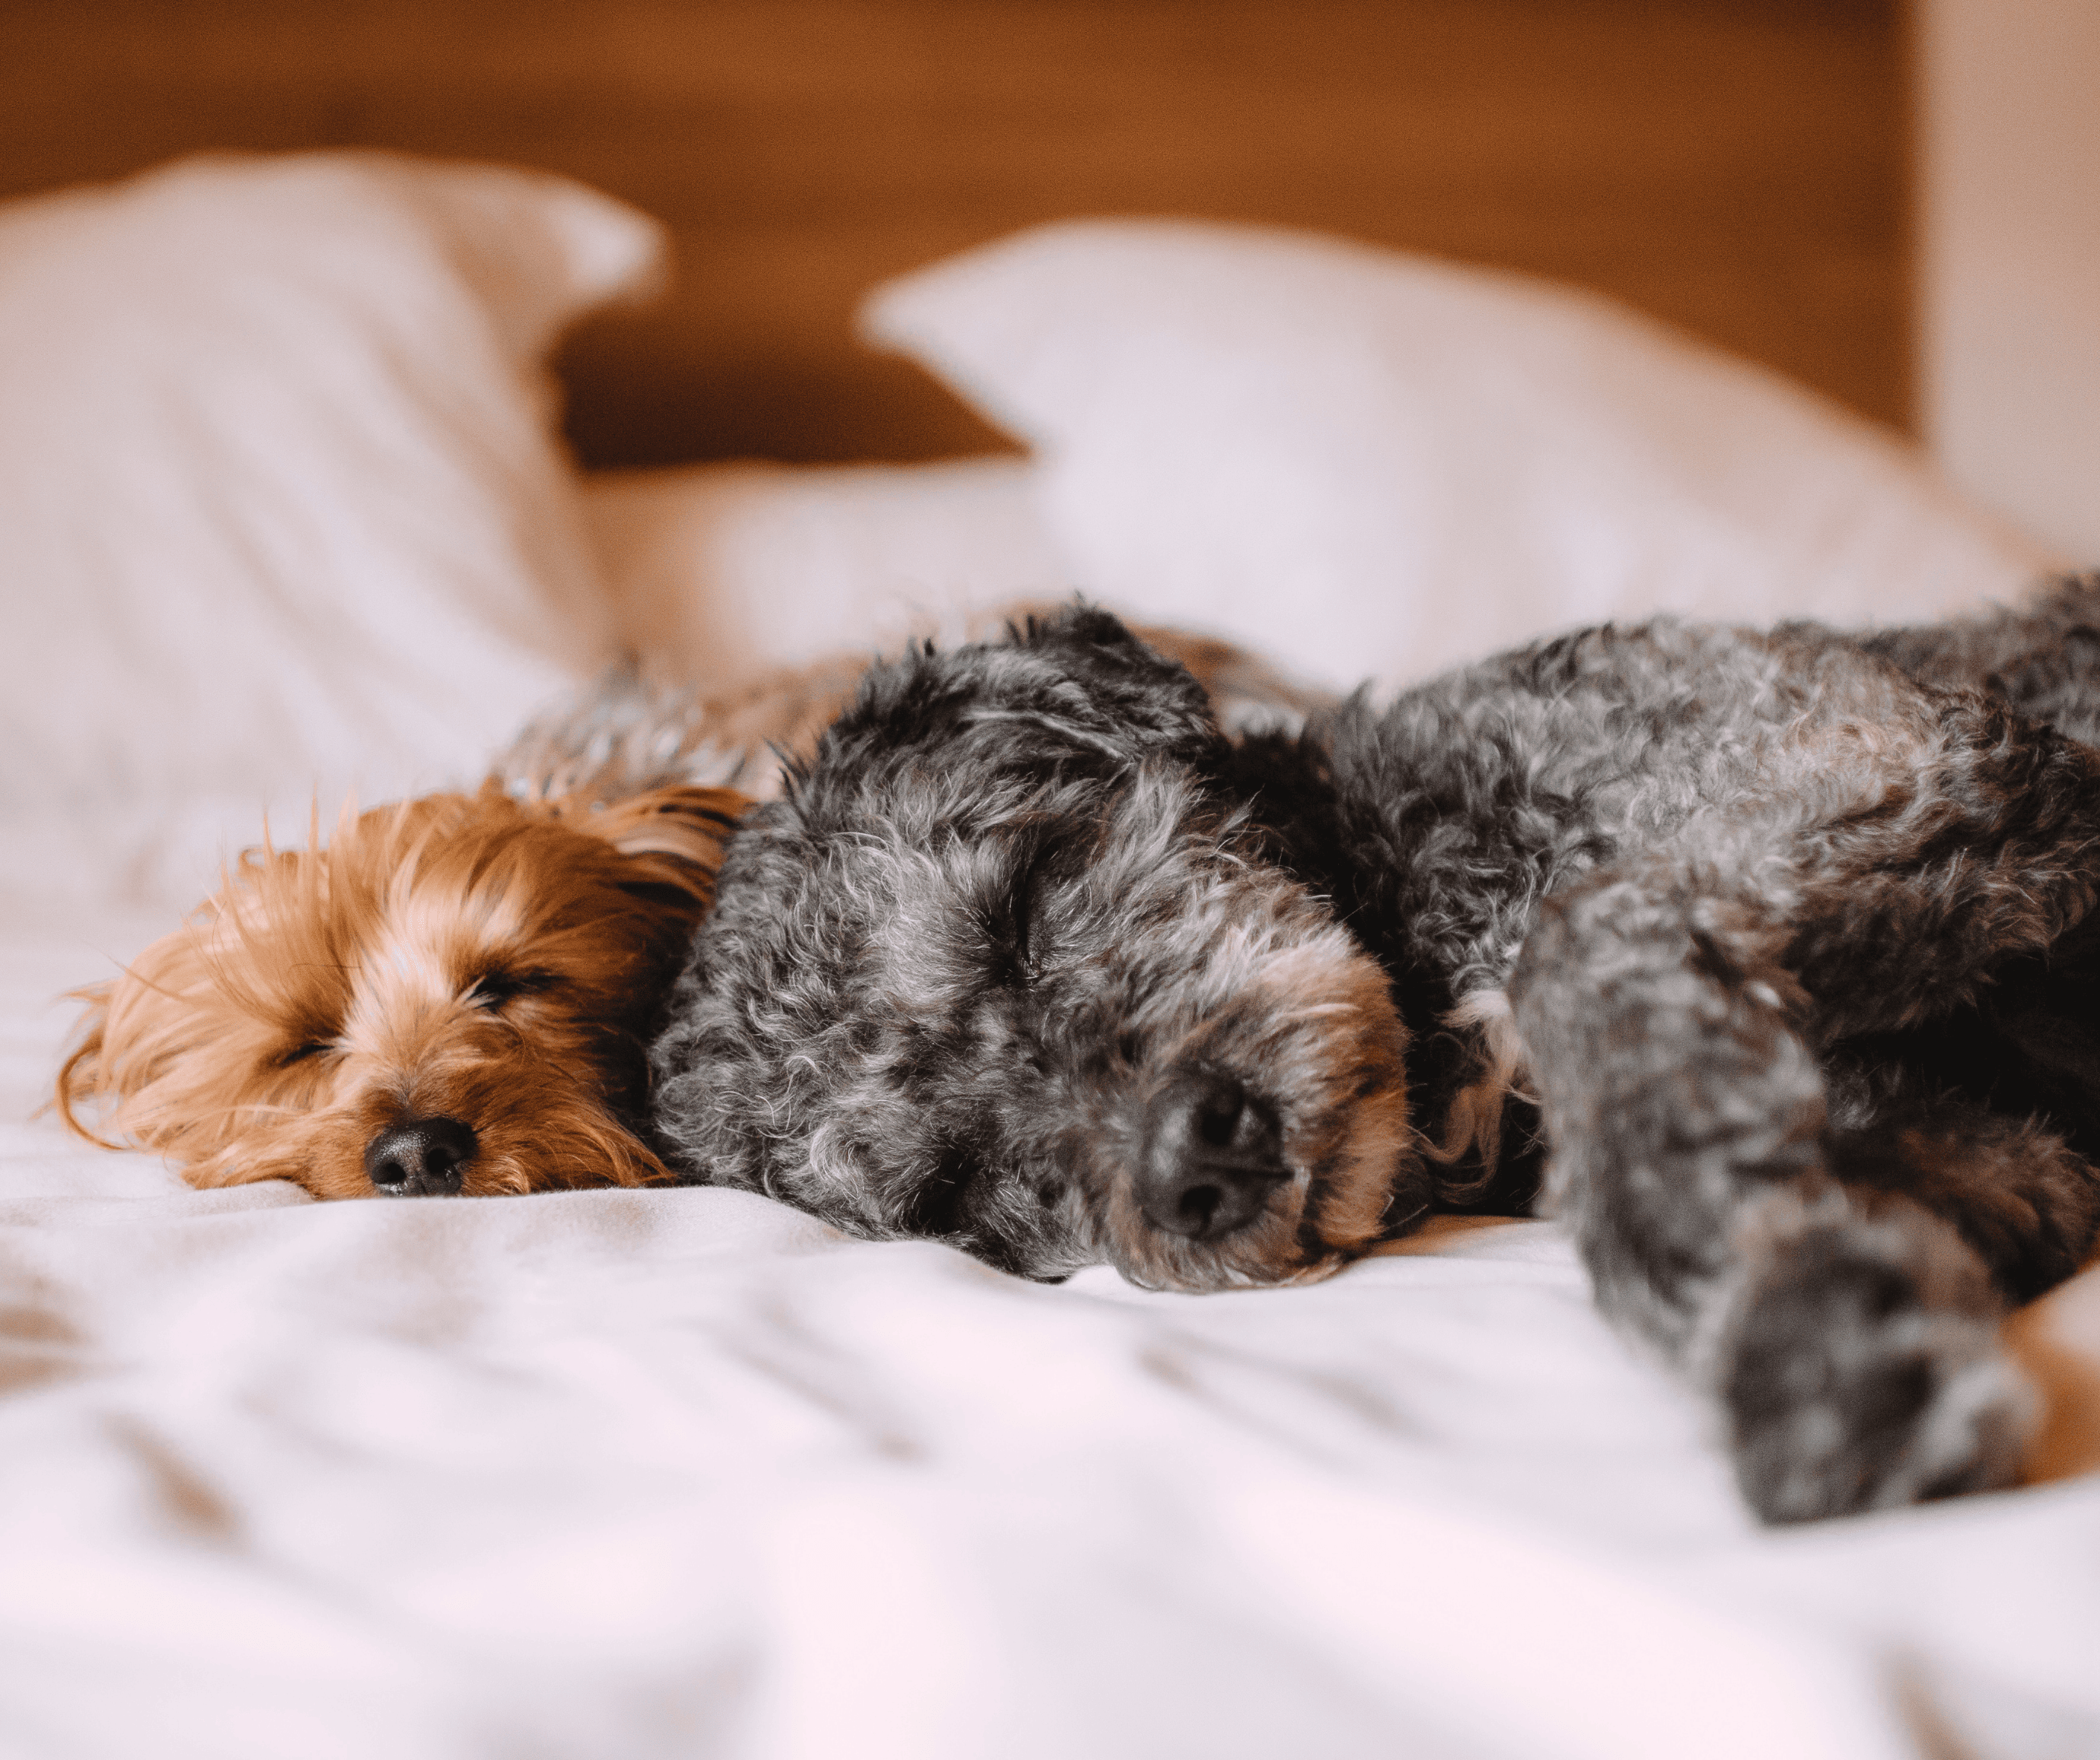 A stock image of two dogs in bed - Start your search on Share to Buy today!